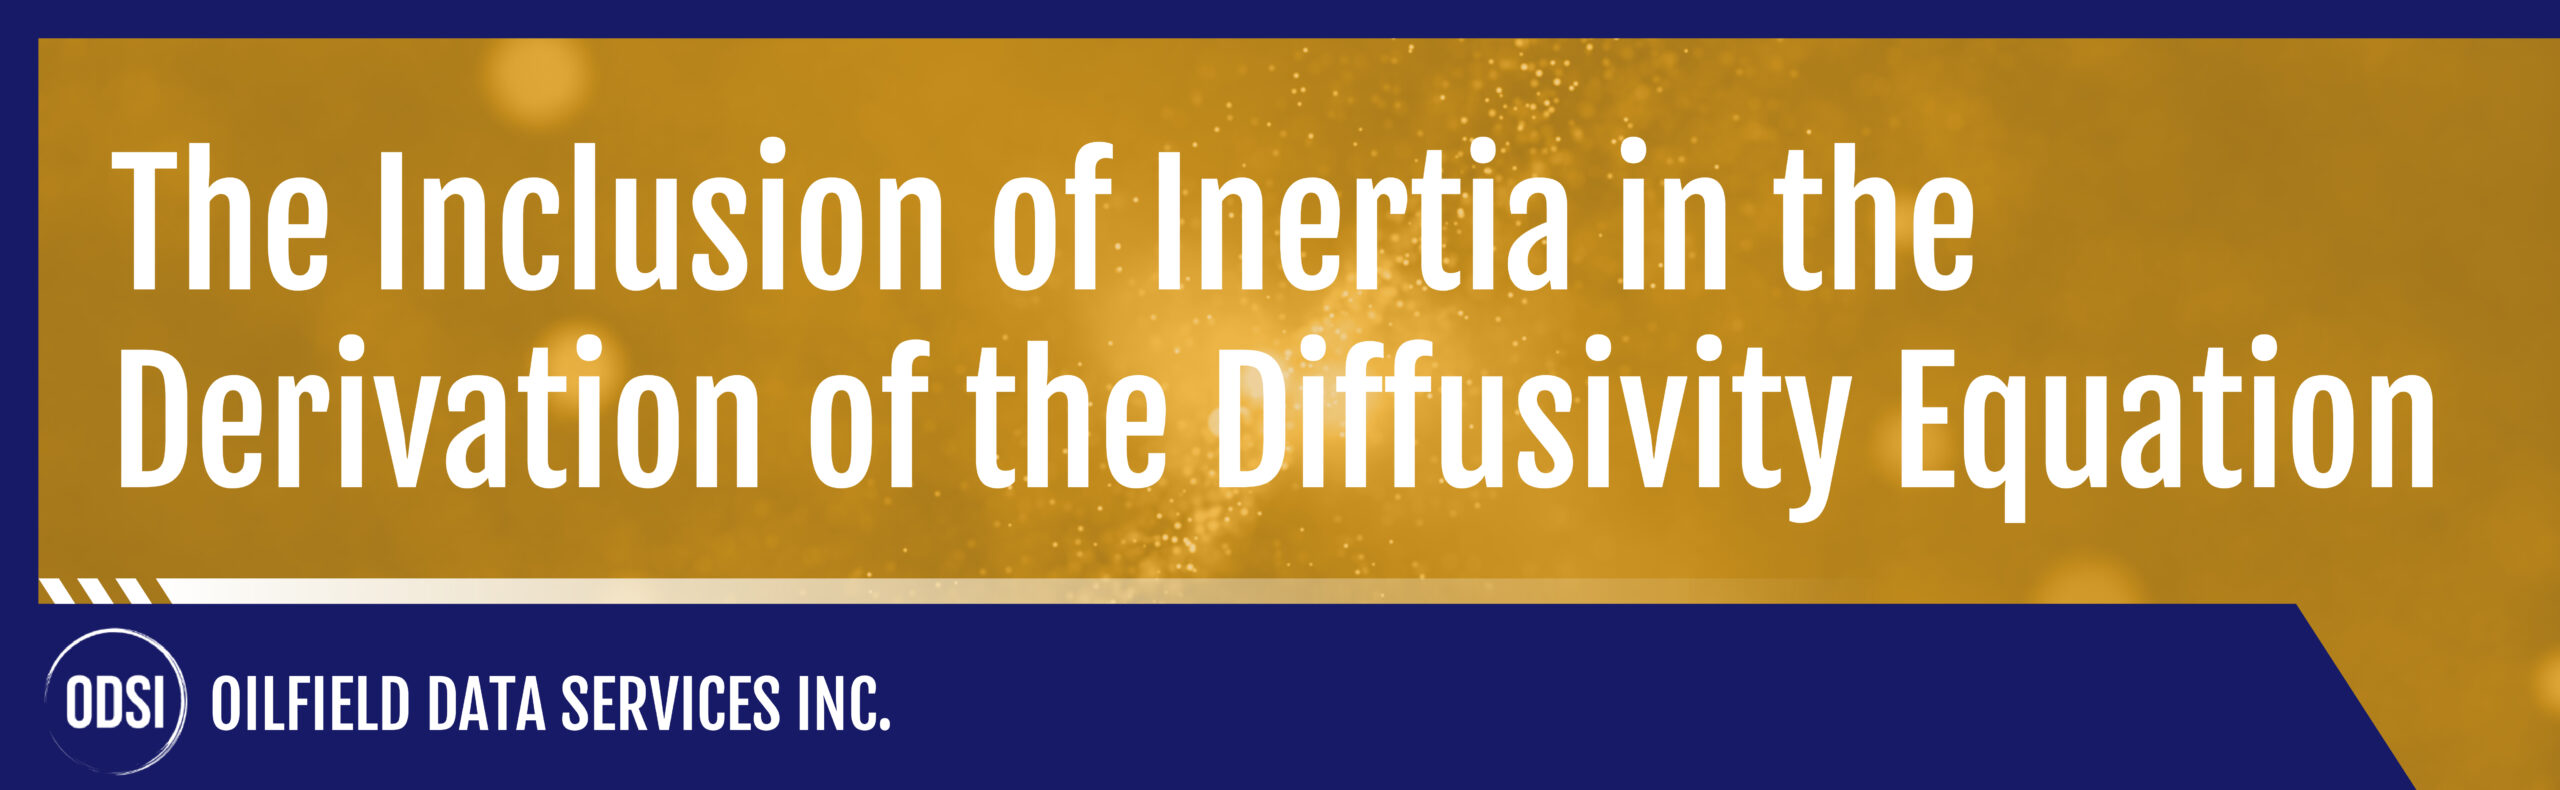 The Inclusion of Inertia in the Derivation of the Diffusivity Equation